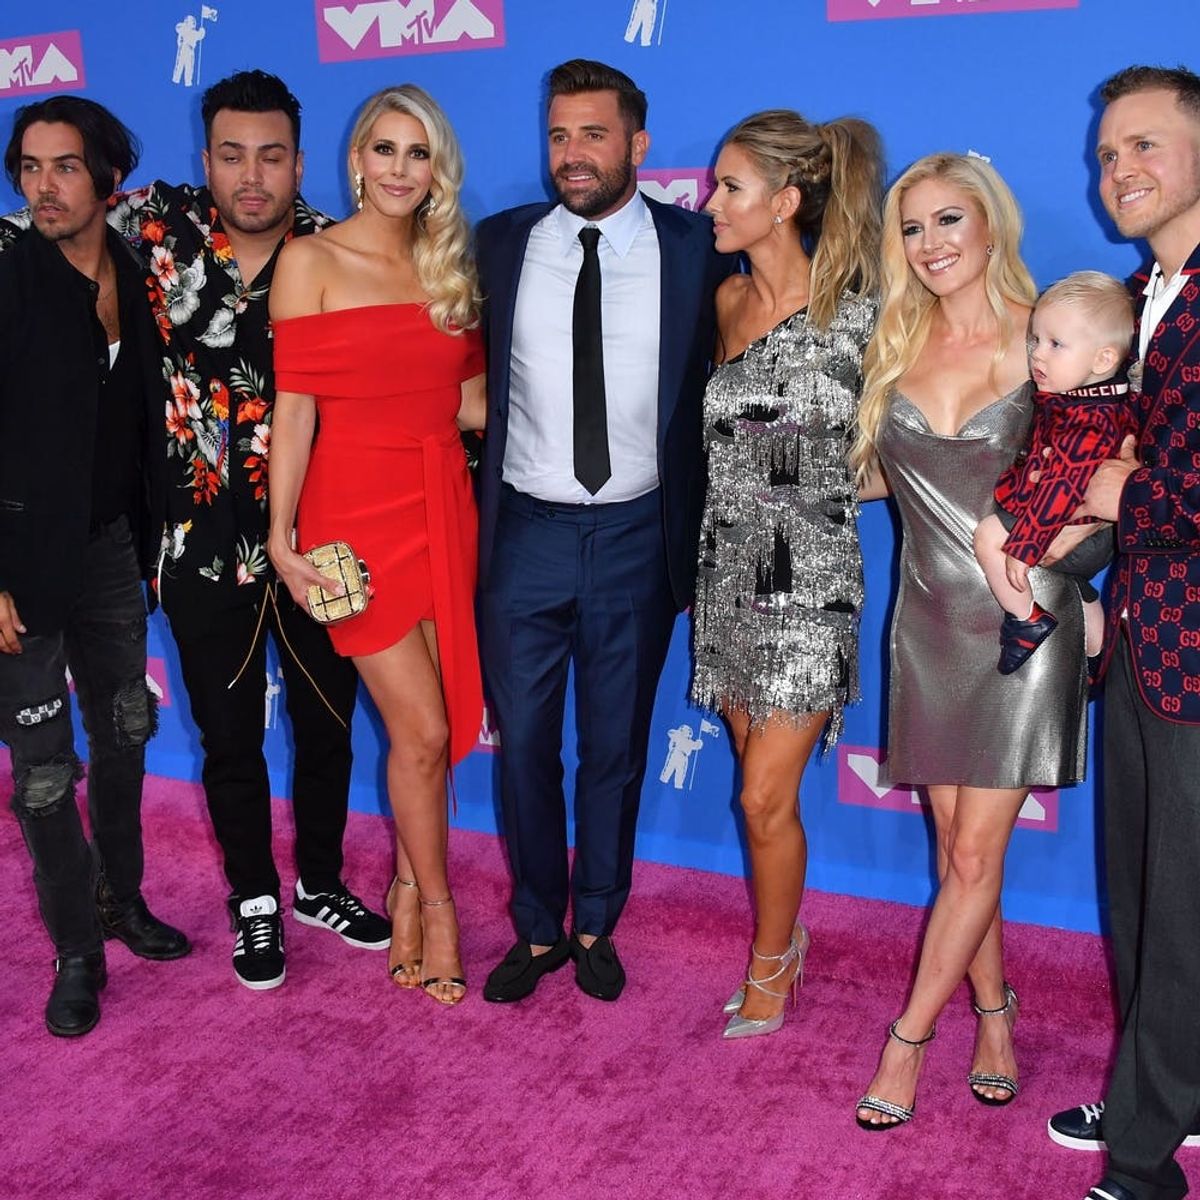 MTV Announced a Reboot of ‘The Hills’ During the 2018 VMAs